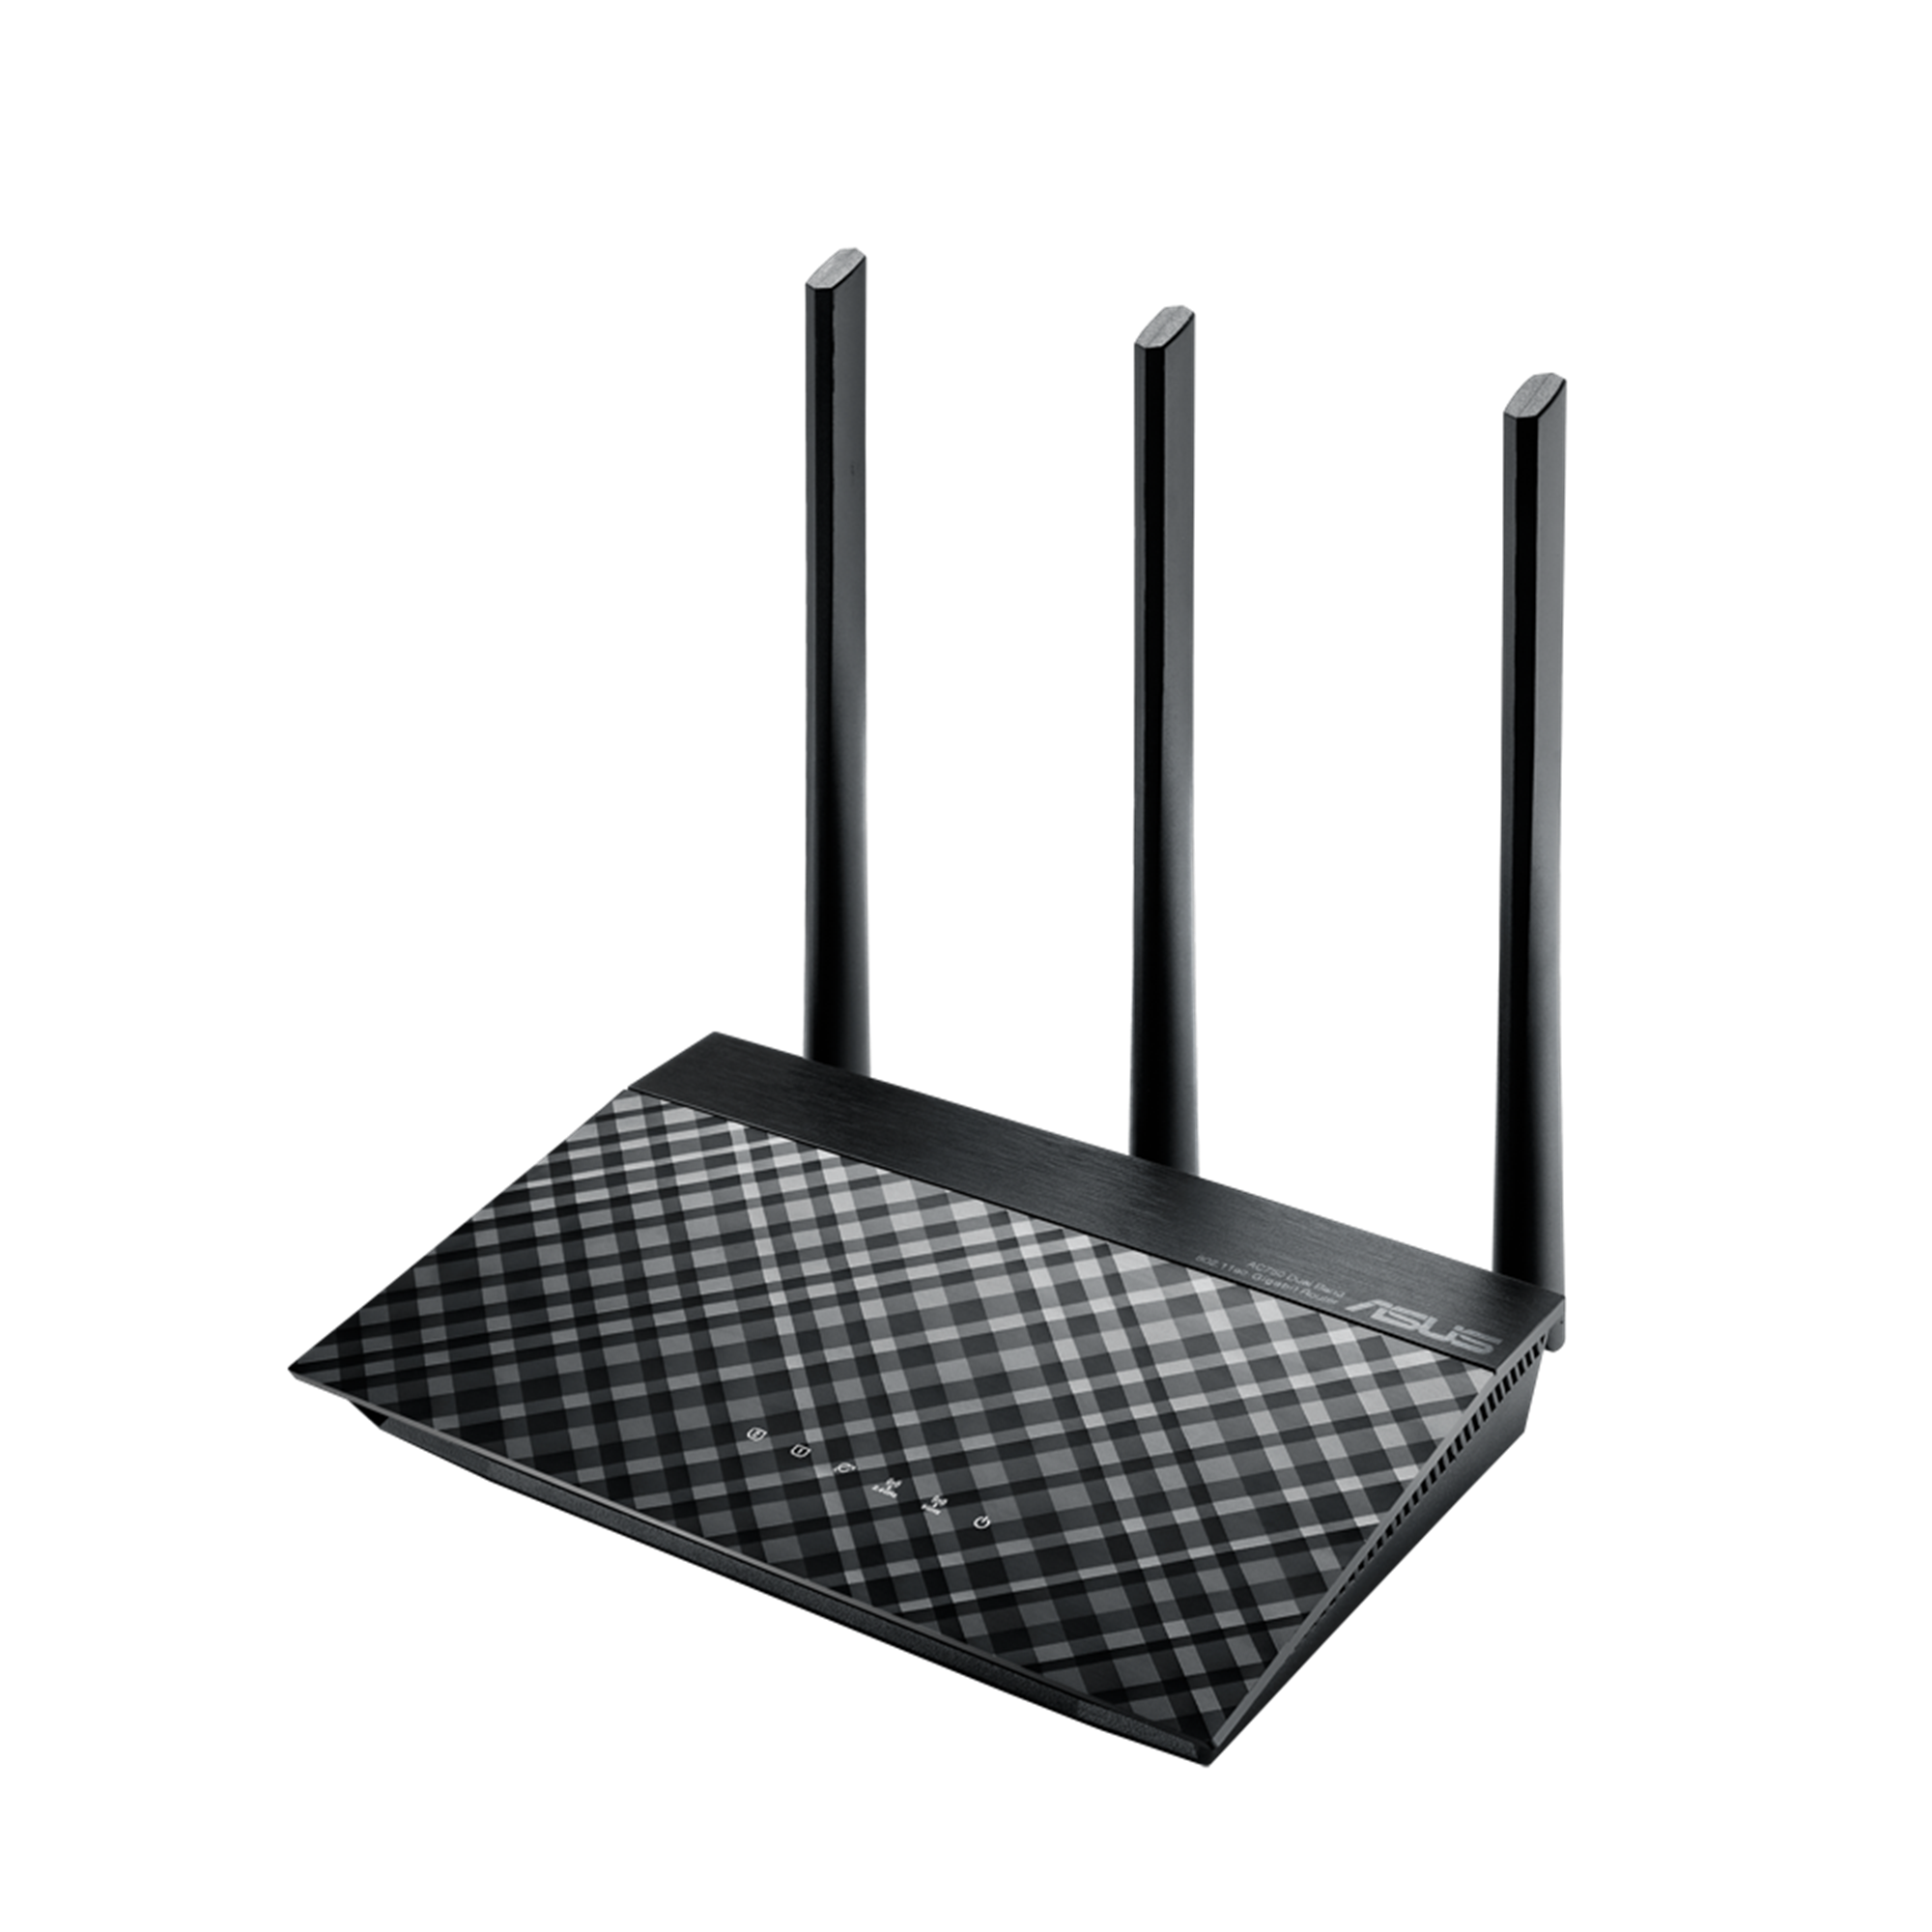 RT-AC53｜WiFi Routers｜ASUS Global